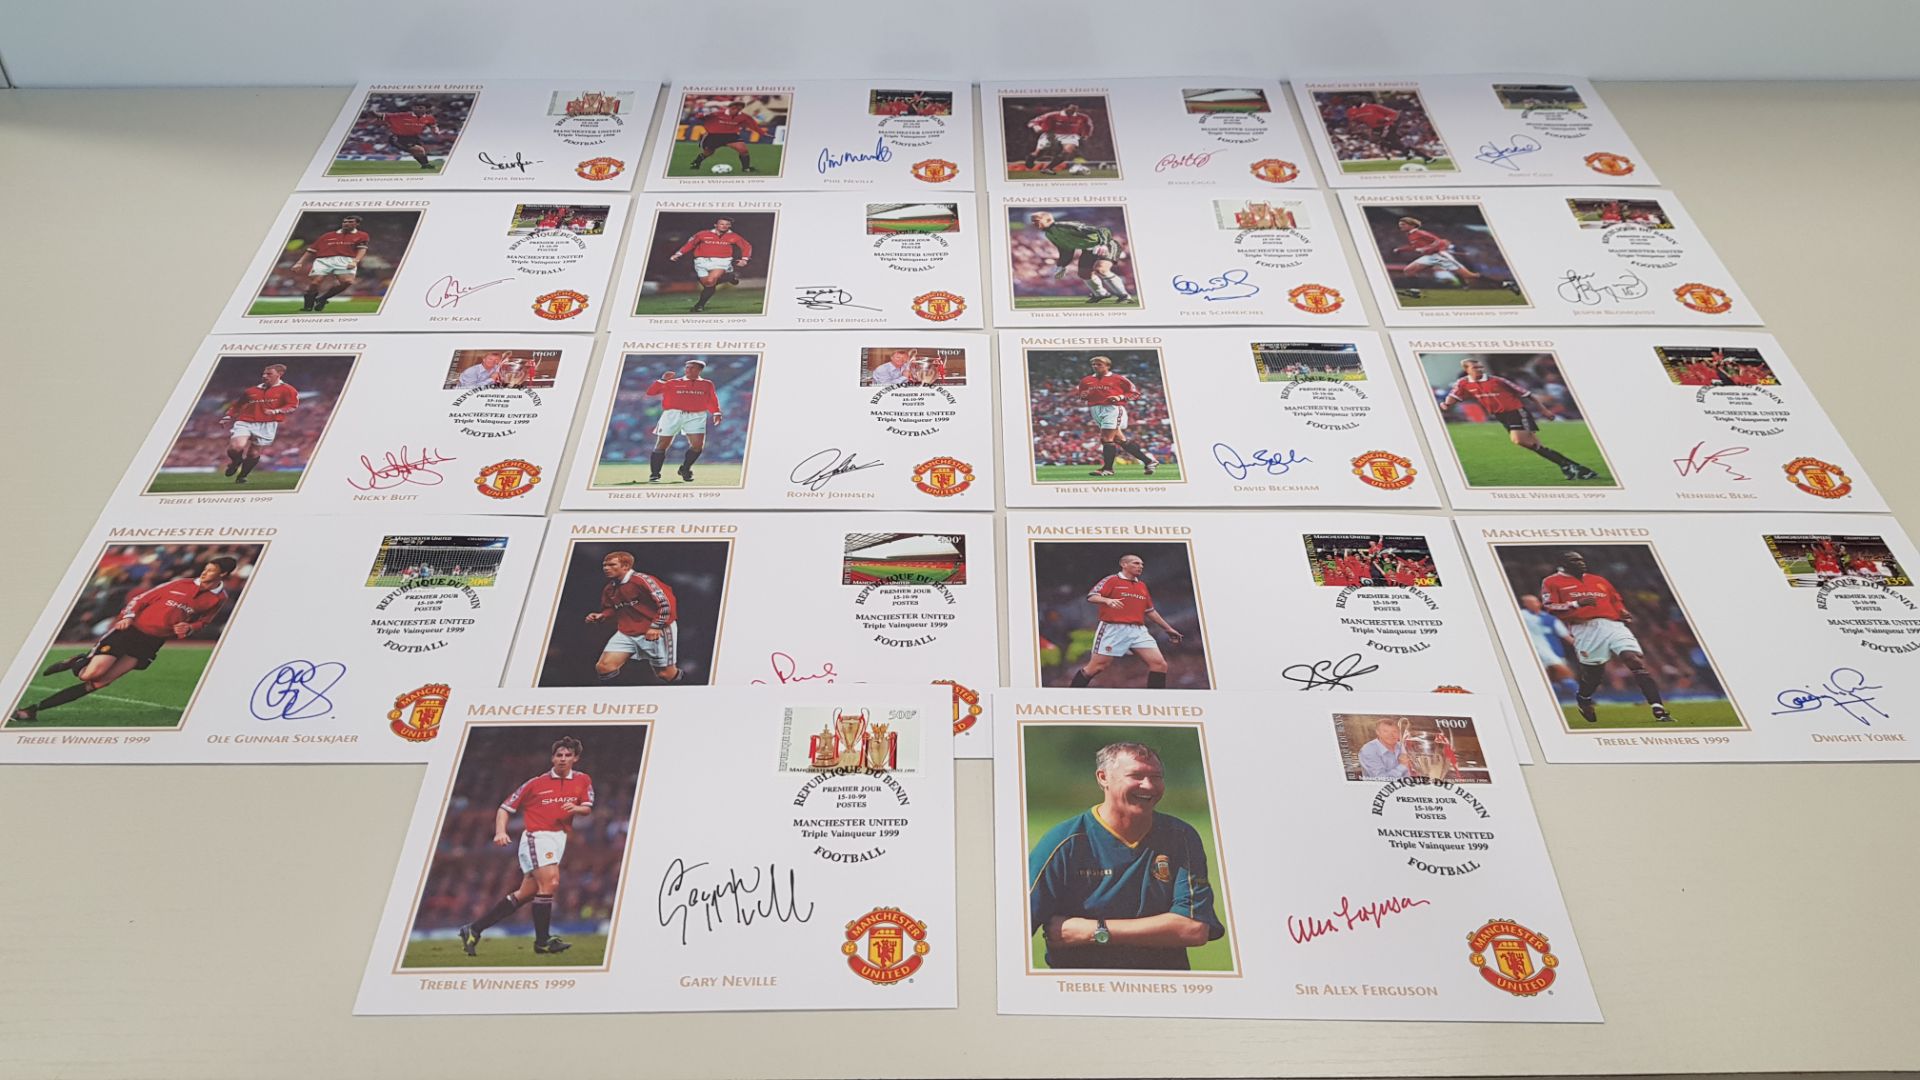 17 X MANCHESTER UNITED POST CARDS WITH PLAYERS PHOTO AND SIGNATURE PLAYERS TO INC - DENIS IRWIN, ROY